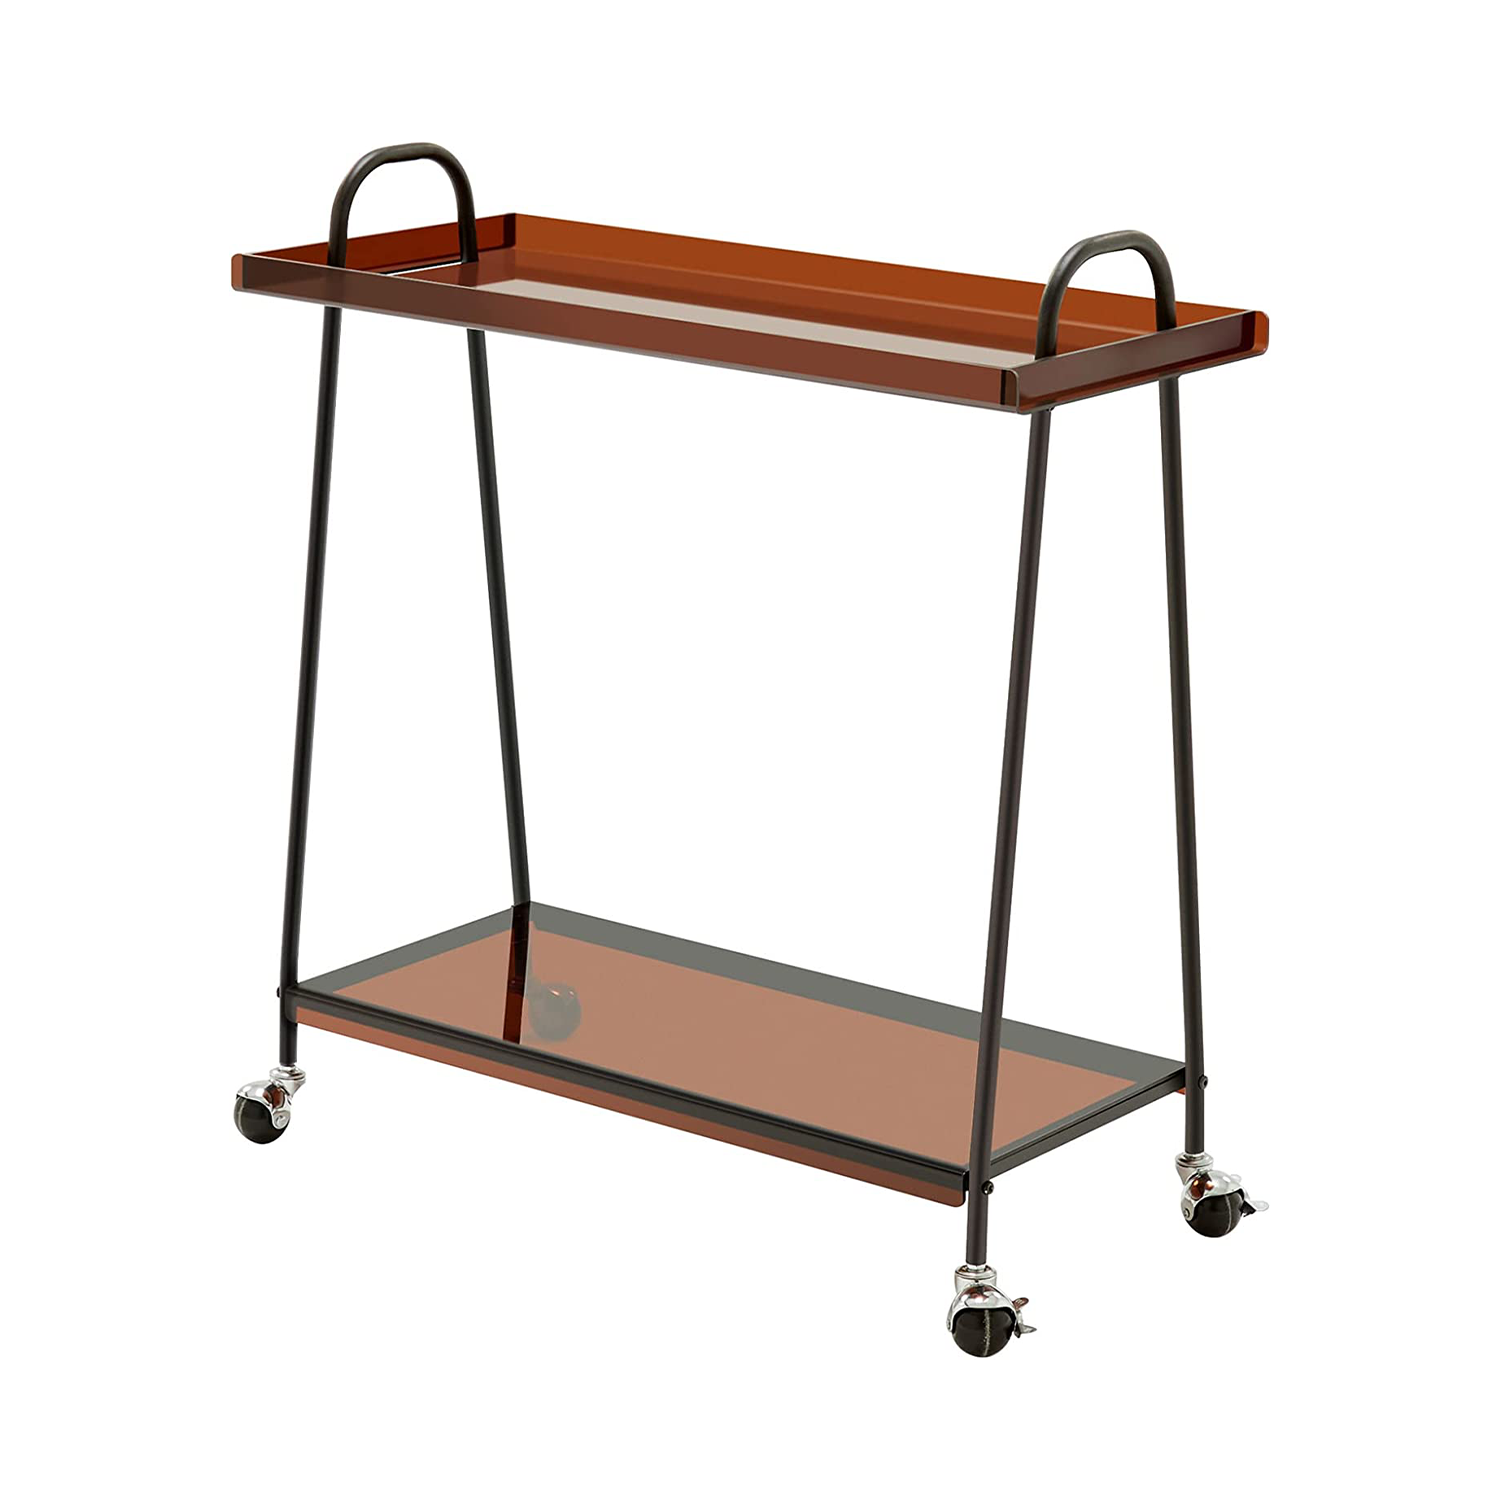 black-brown acrylic bar cart with wheels from Amazon